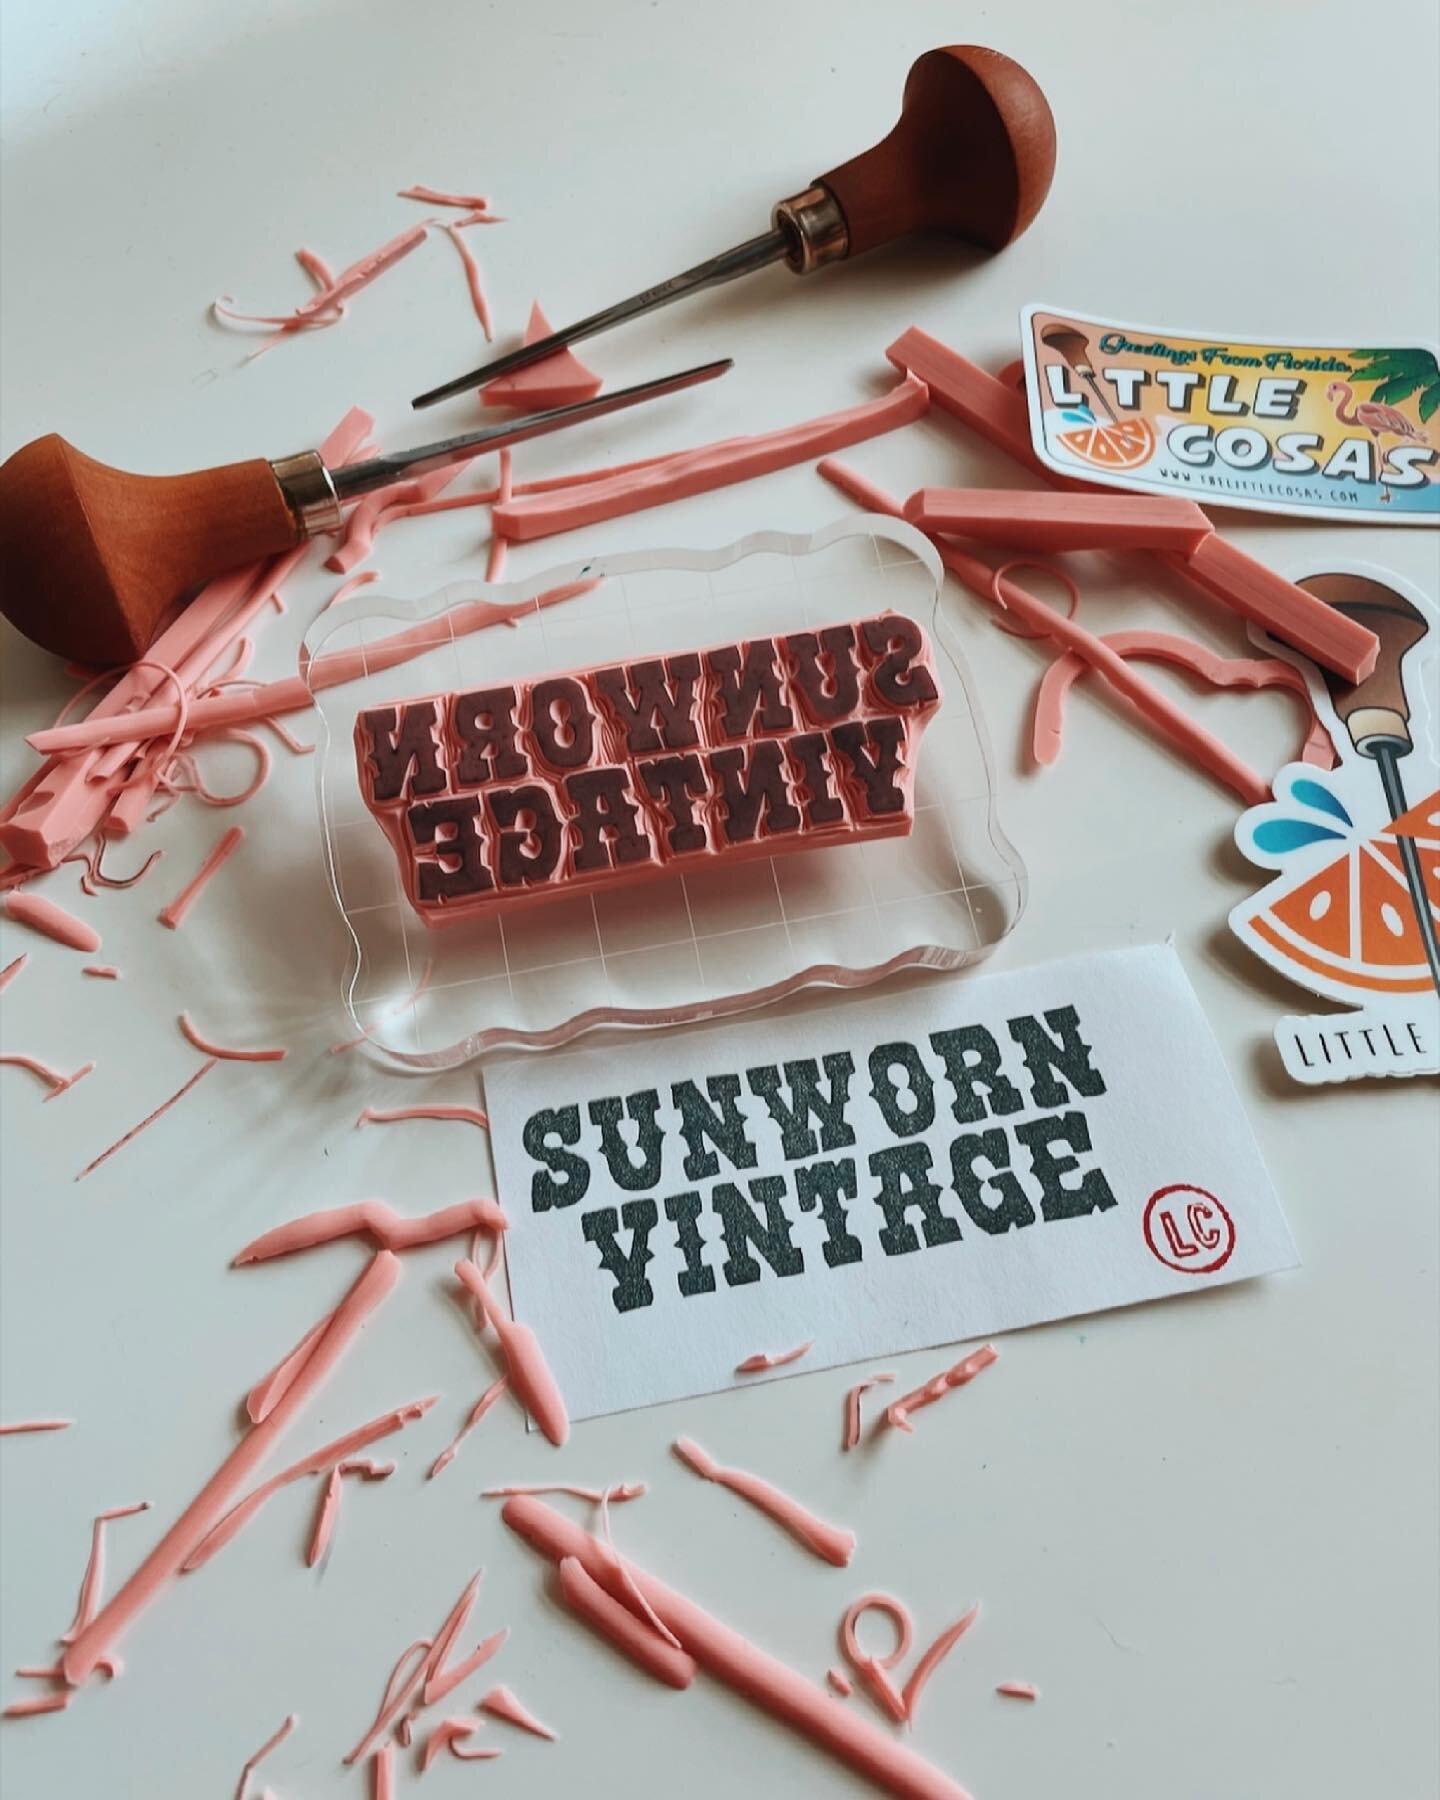 The typography in this stamp makes me want to rebrand and become a vintage cowgirl. Nooo joke! 
✨ 
Here&rsquo;s the latest beauty for @sunwornvintage in Utah! She reworks textiles into the cutest/funkiest pieces! You have to check put her page! We ab